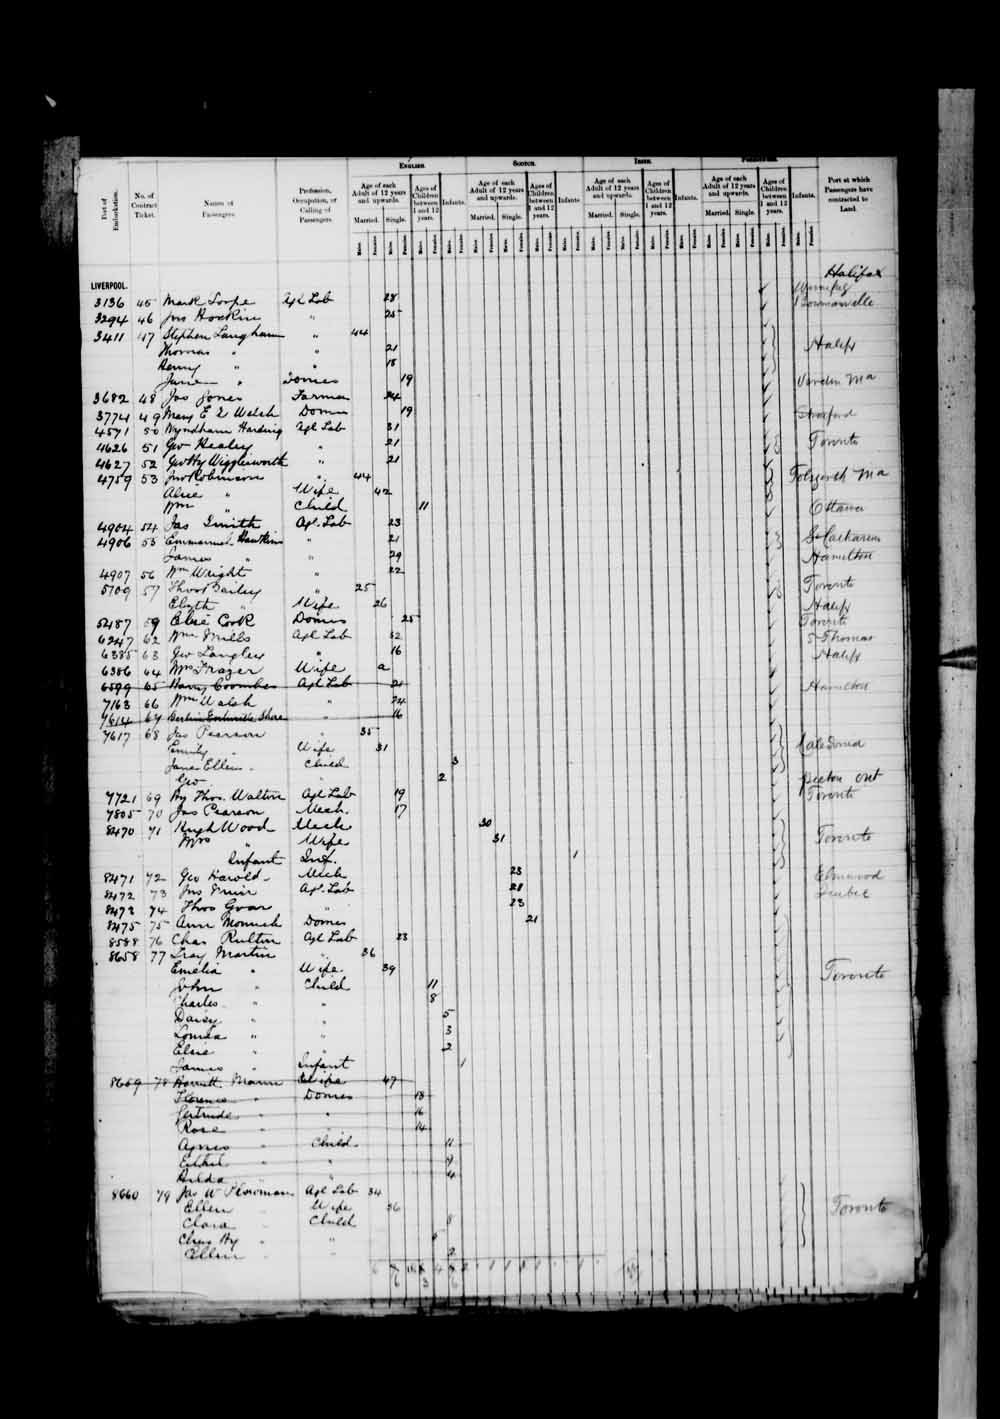 Digitized page of Passenger Lists for Image No.: e003674946